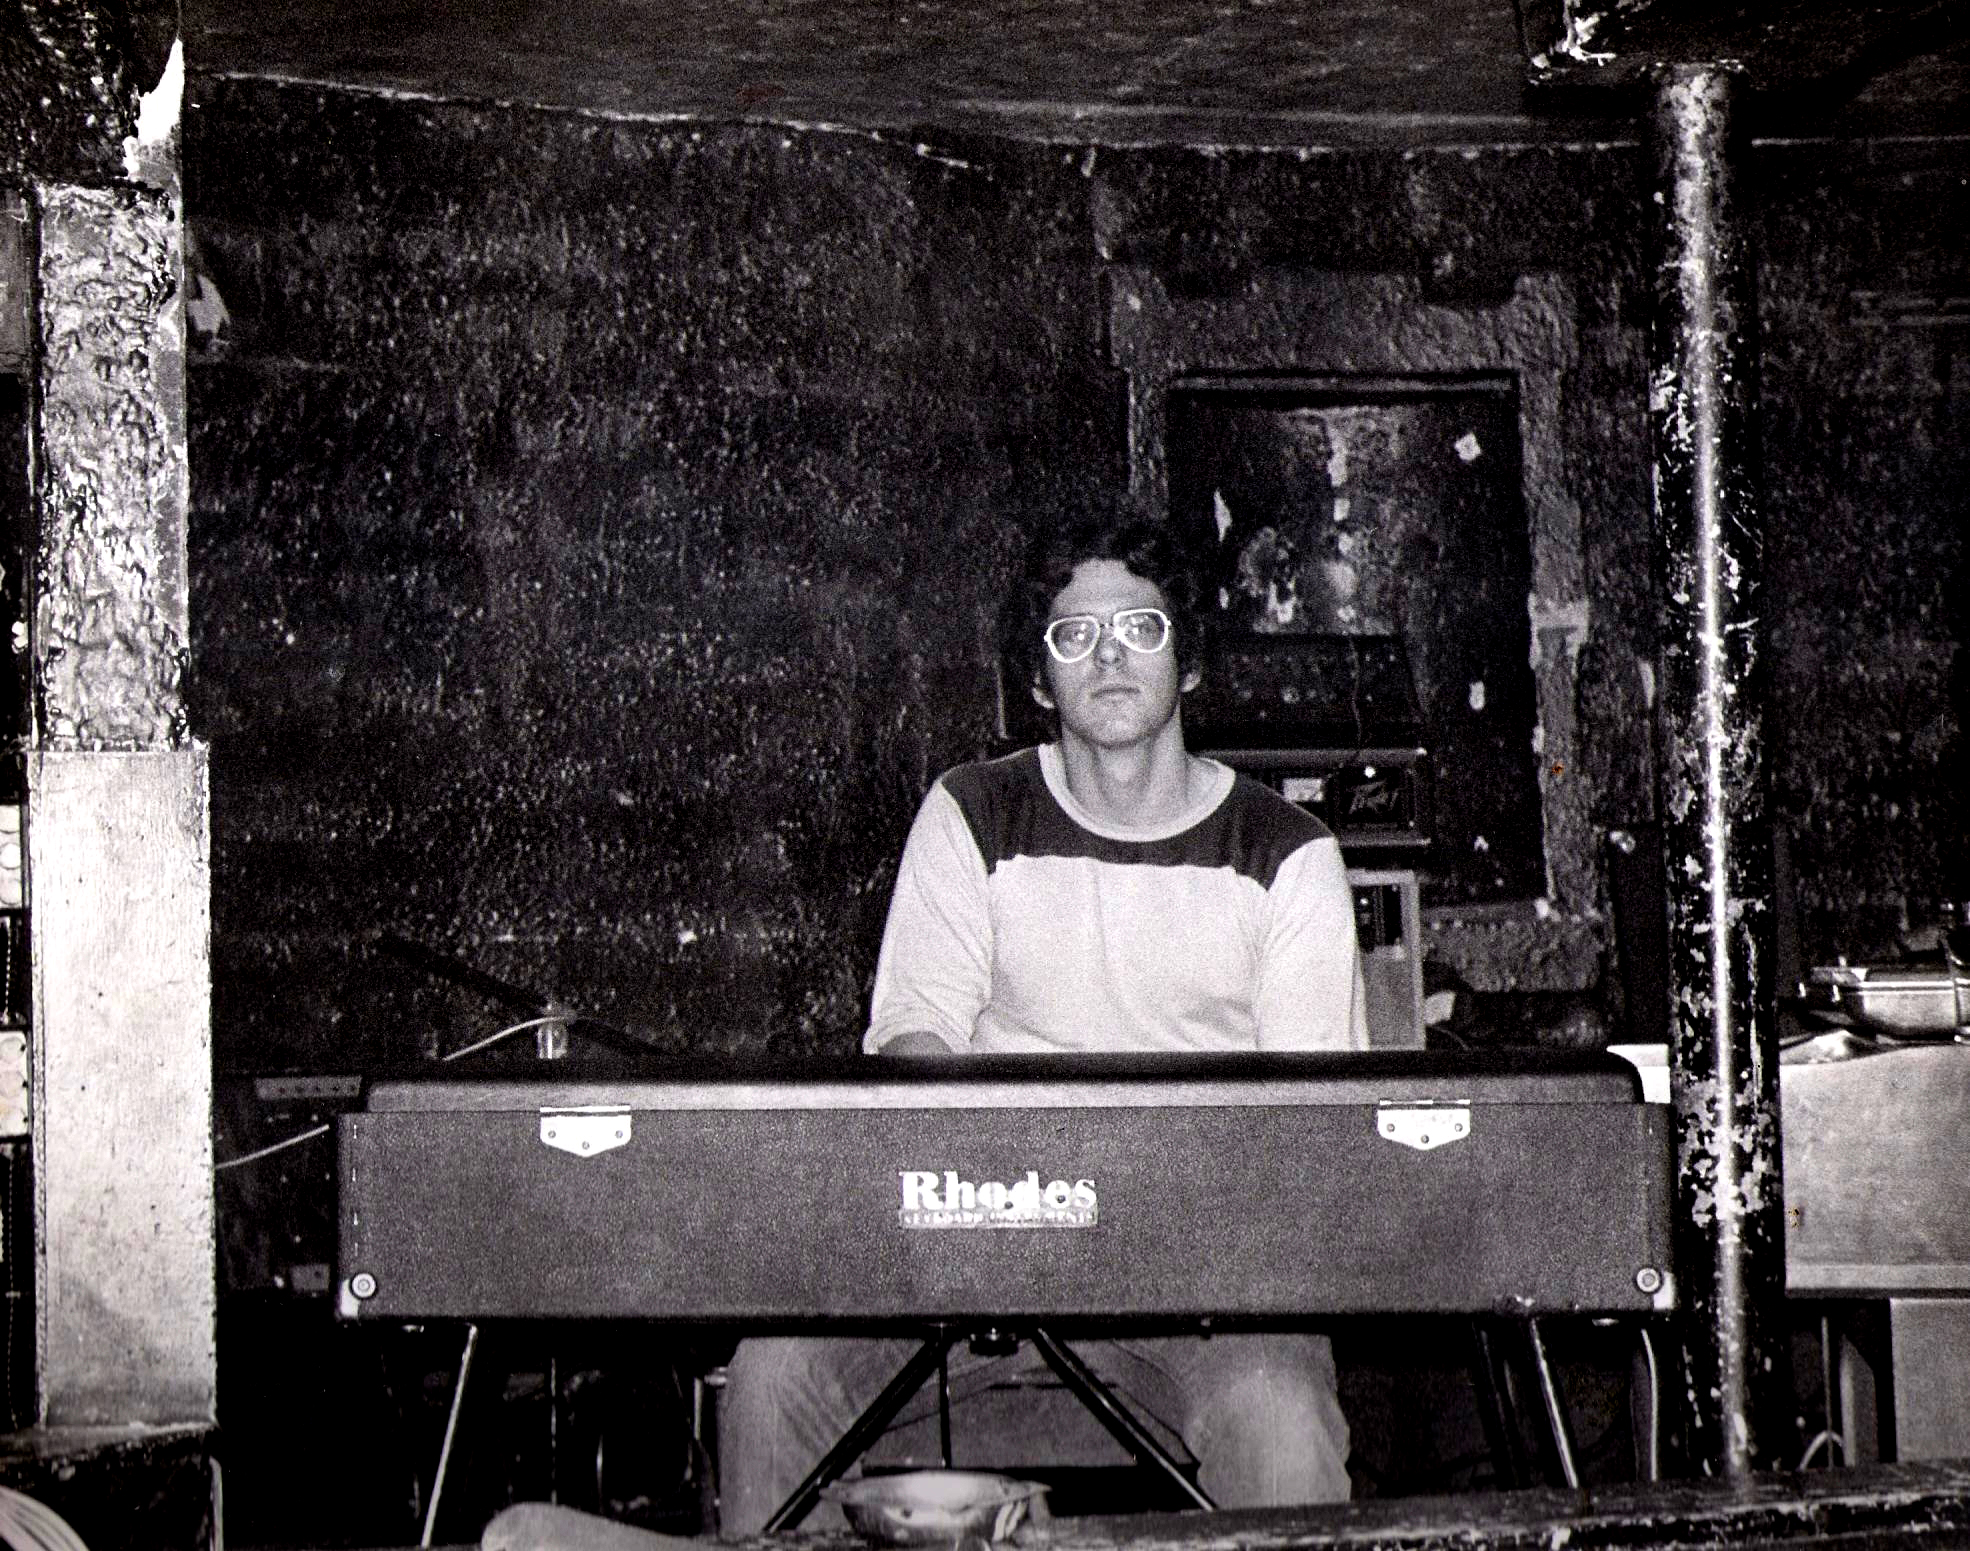 Dave Maltbie rocks the Fender Rhodes, Wurlitzer 4100 and Moog Sonic Six (did I mention it’s 1979?). Dave was like, “how’d I get roped into this gig?”